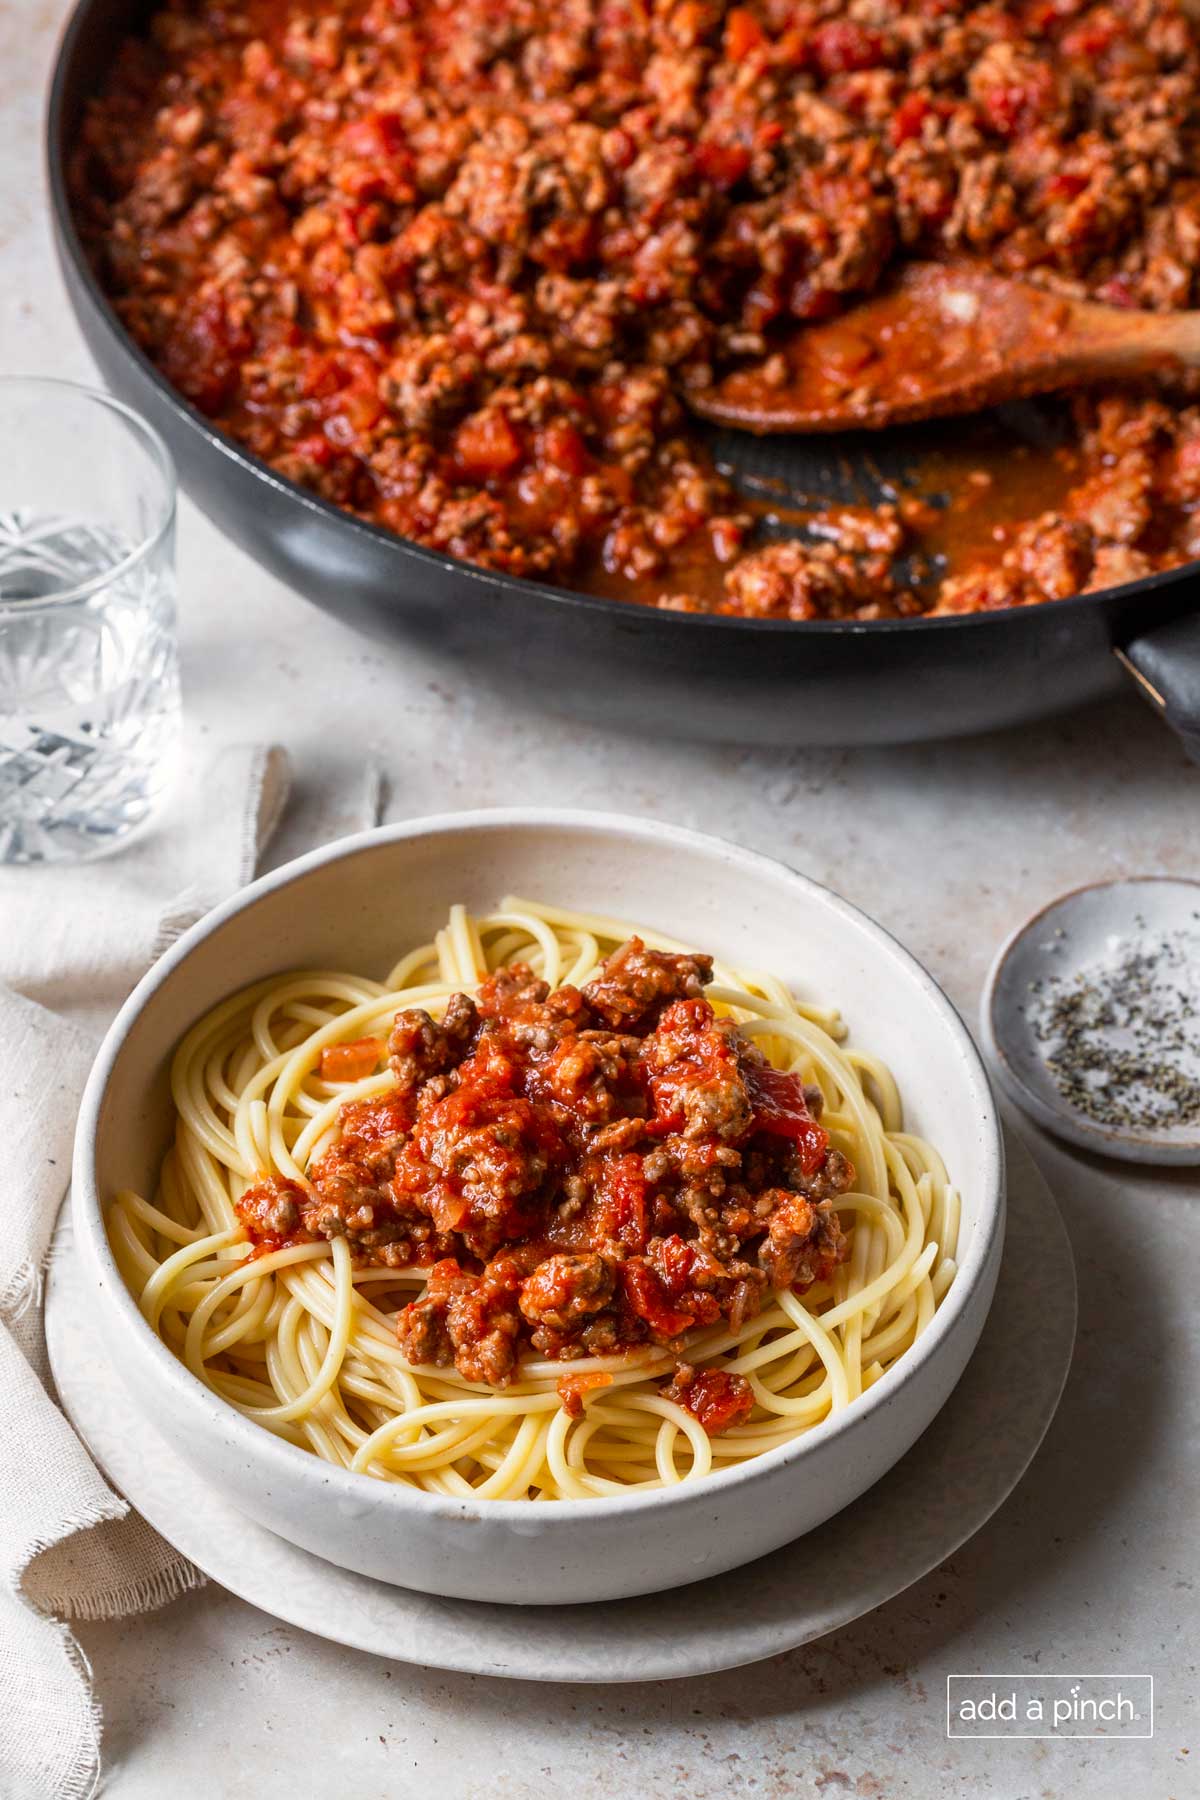 Photo place setting of spaghetti with skillet filled with homemade spaghetti sauce and a wooden spoon in the background.